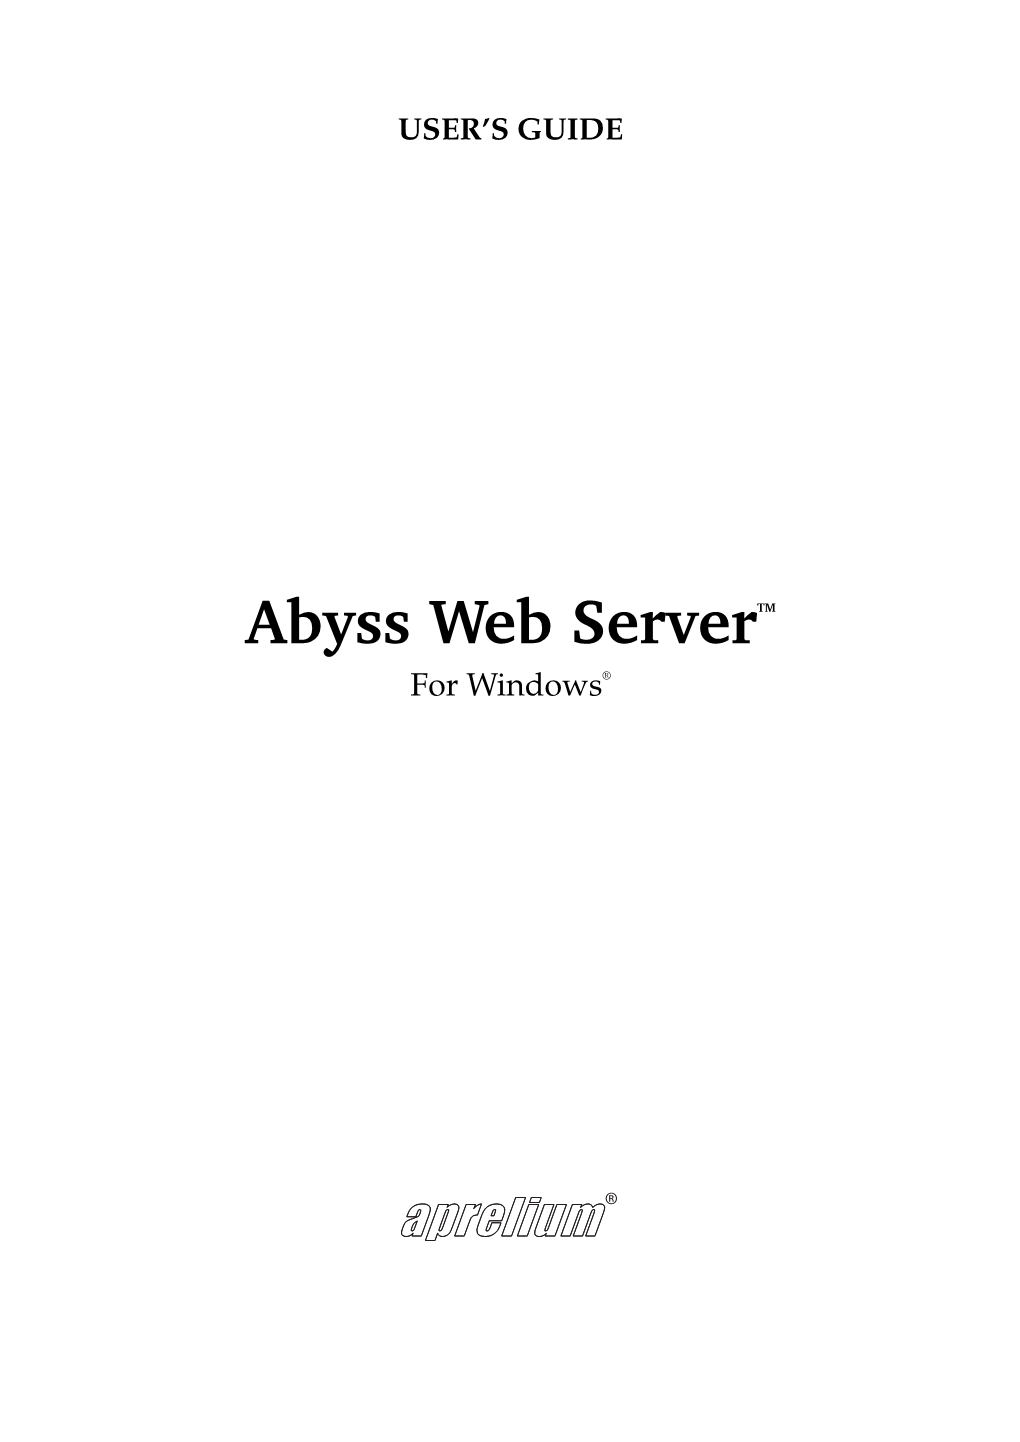 Abyss Web Server User's Guide